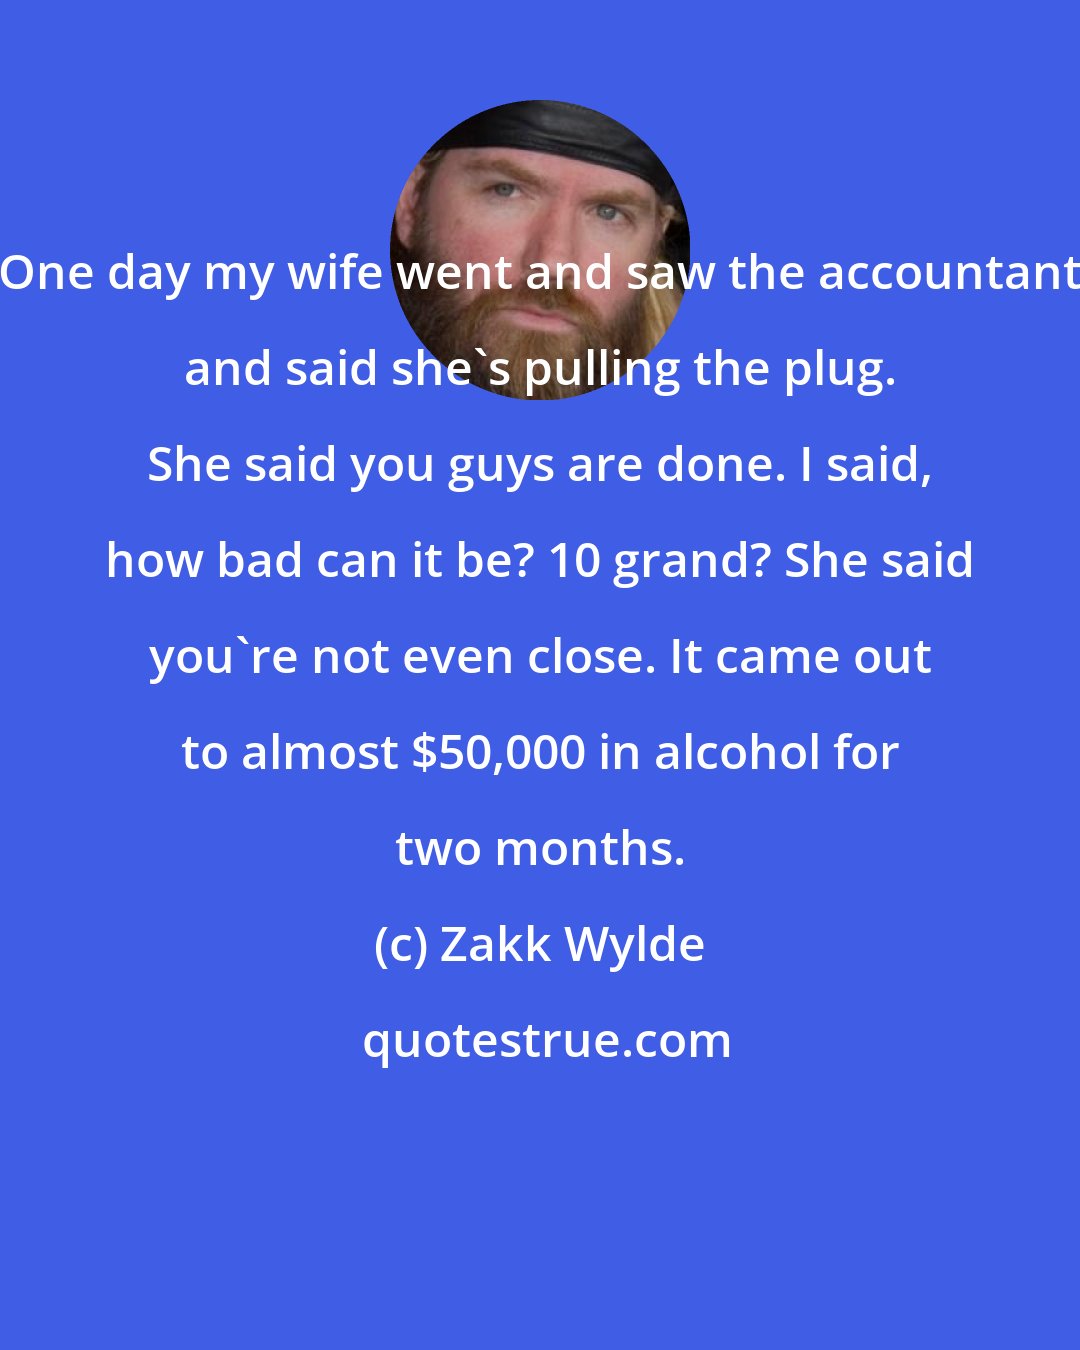 Zakk Wylde: One day my wife went and saw the accountant and said she's pulling the plug. She said you guys are done. I said, how bad can it be? 10 grand? She said you're not even close. It came out to almost $50,000 in alcohol for two months.